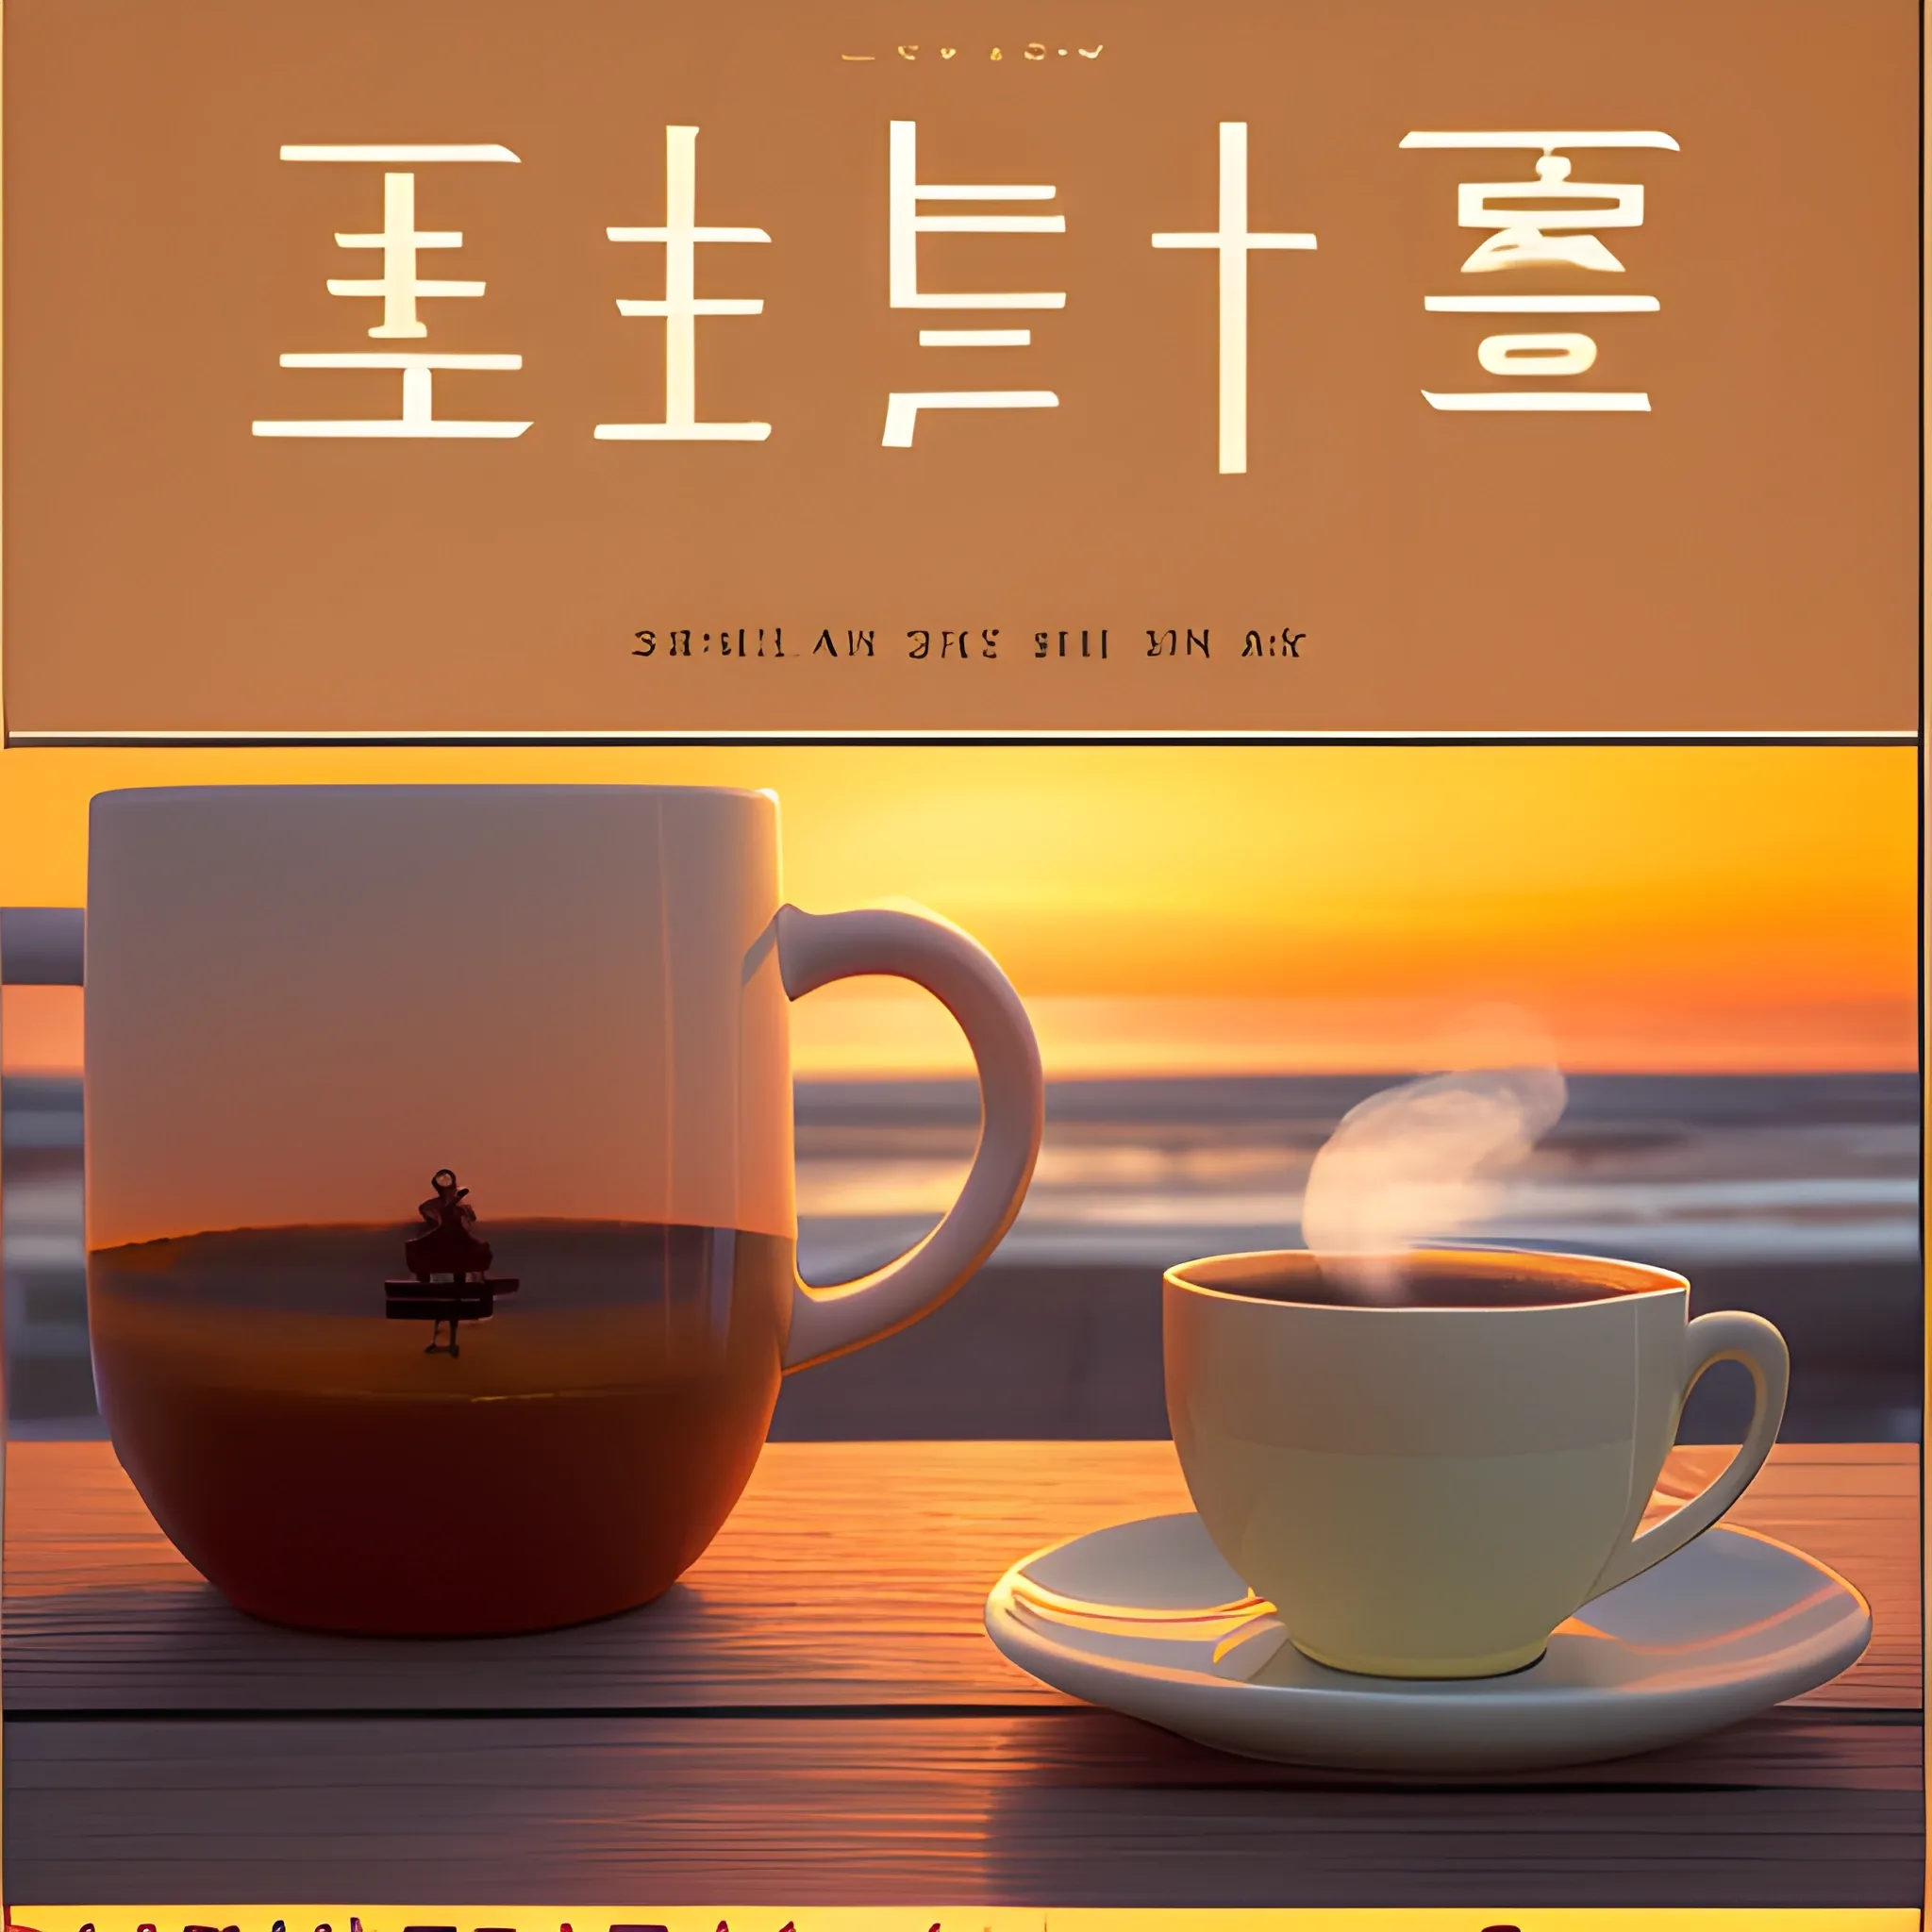 Book Blog Cover. A scene of two books and a steaming cup of warm coffee on a table at a seaside cafe bathed in the glow of sunset. And write "책마녀" on right bottom corner.